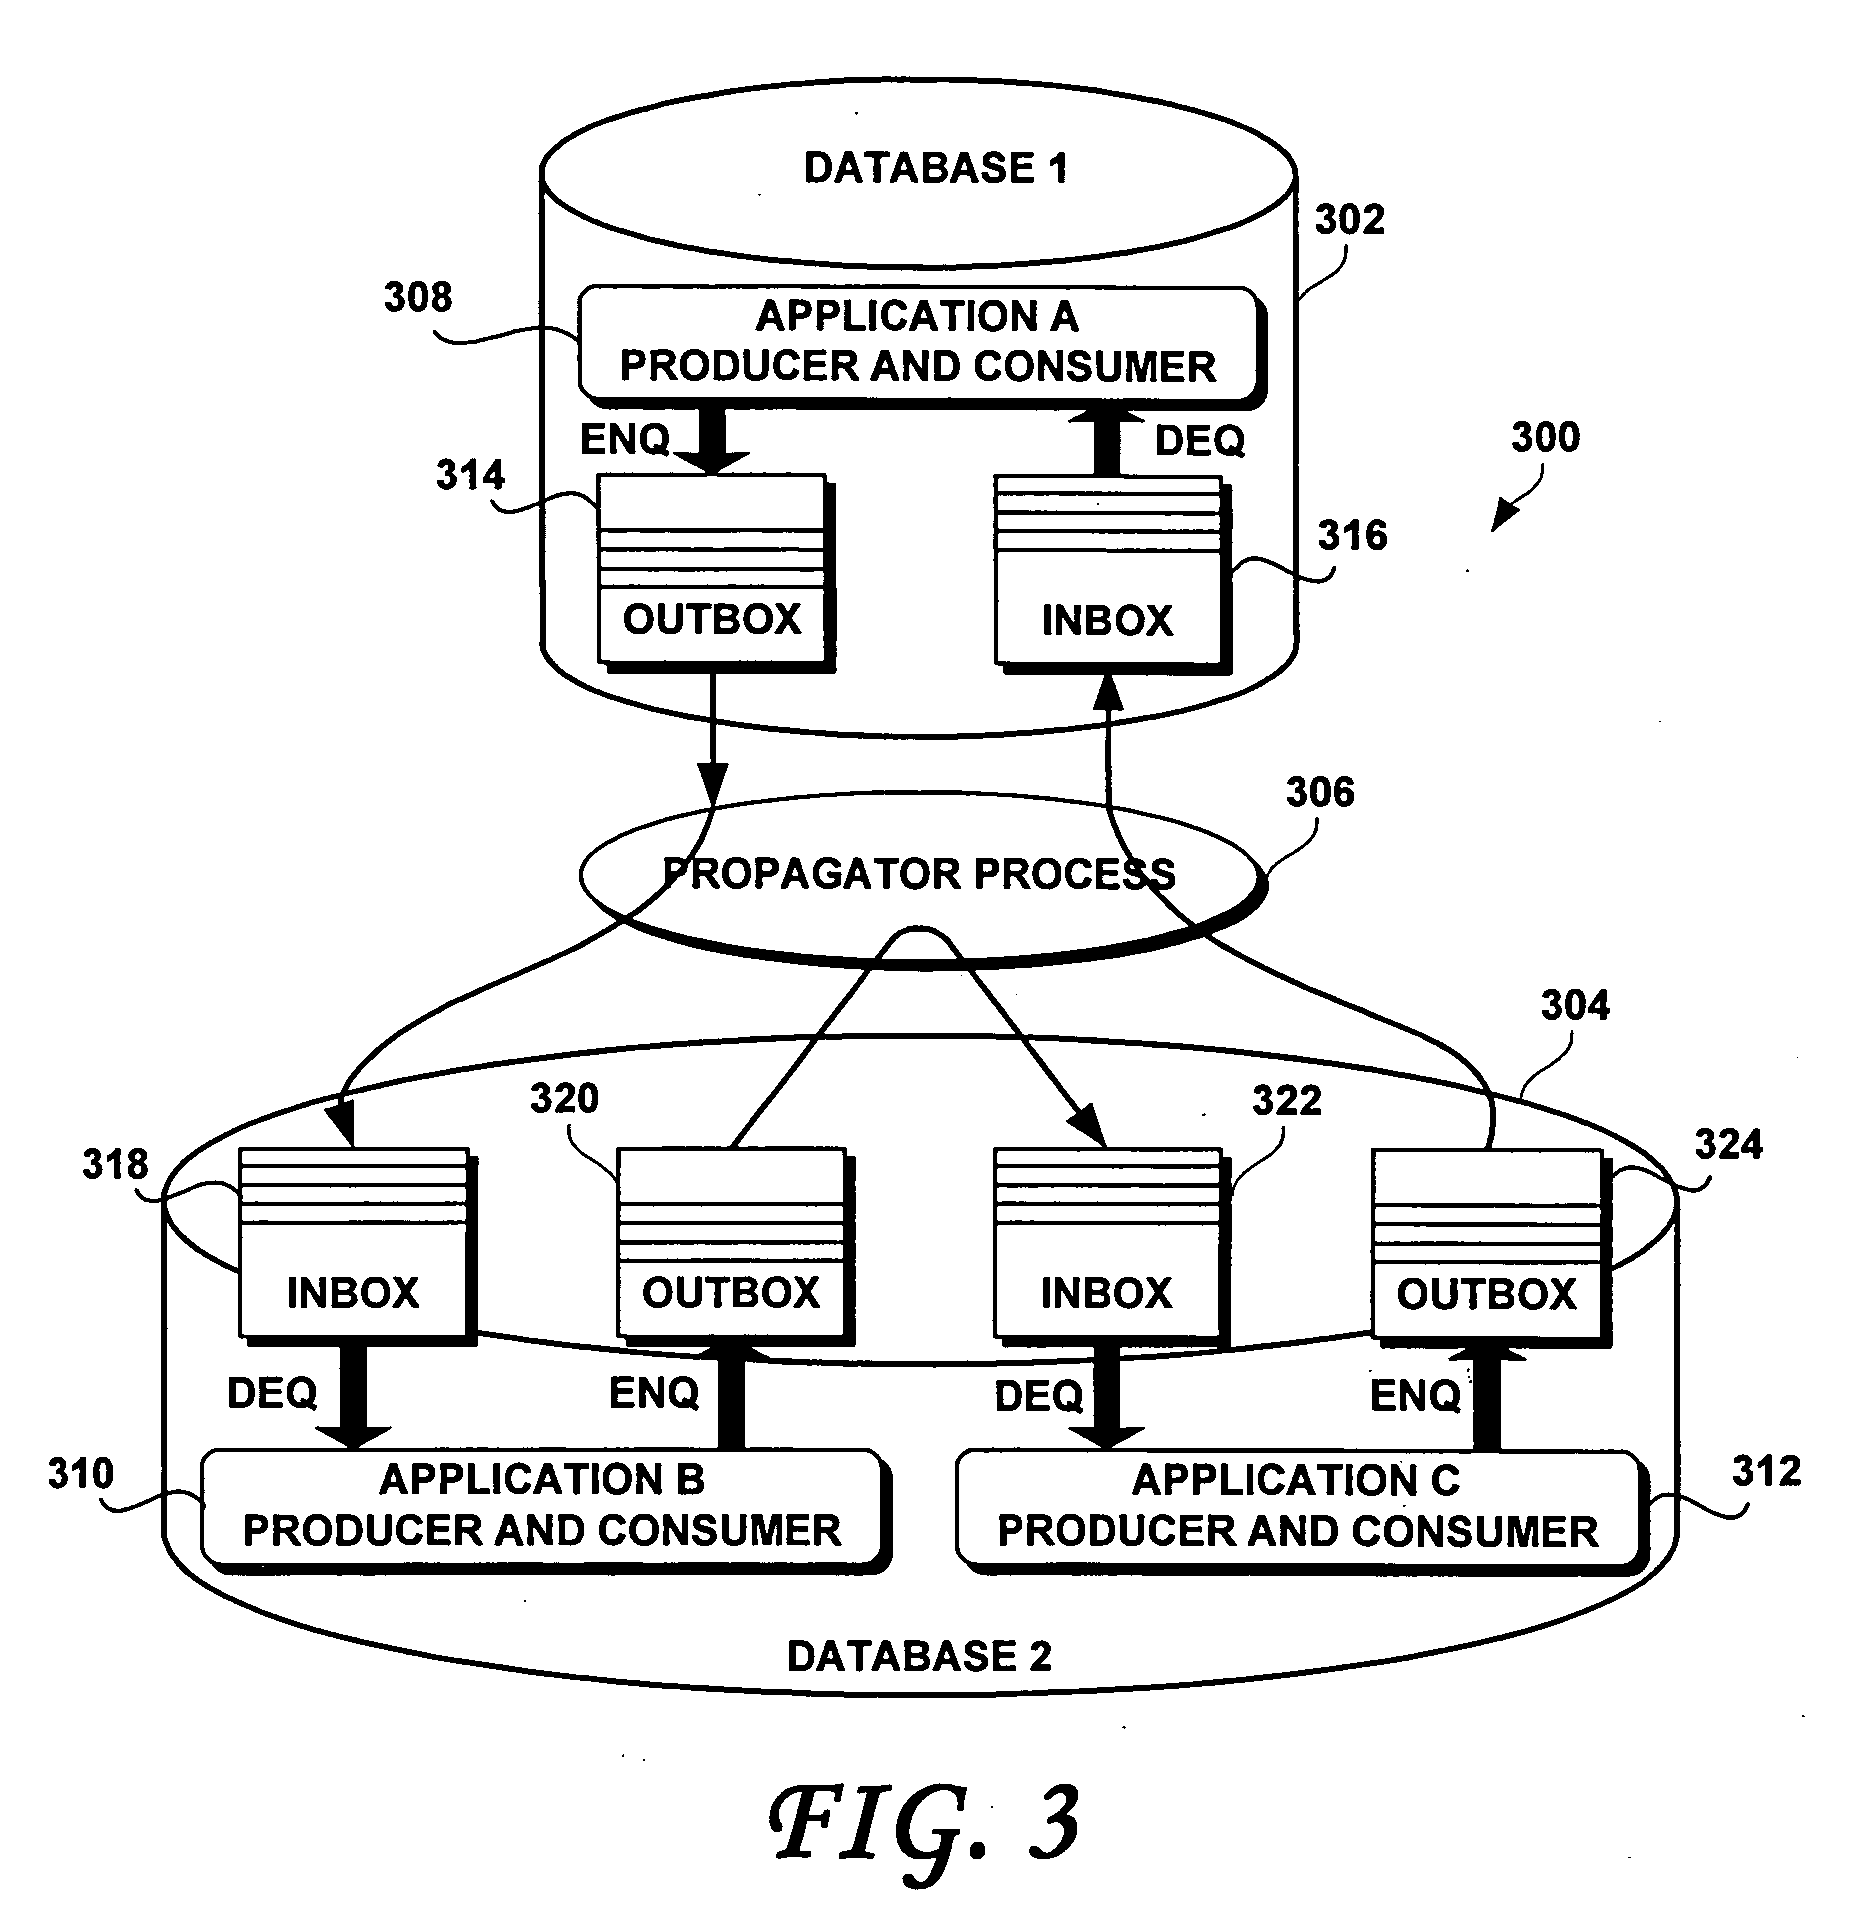 Methods and systems for efficient queue propagation using a single protocol-based remote procedure call to stream a batch of messages